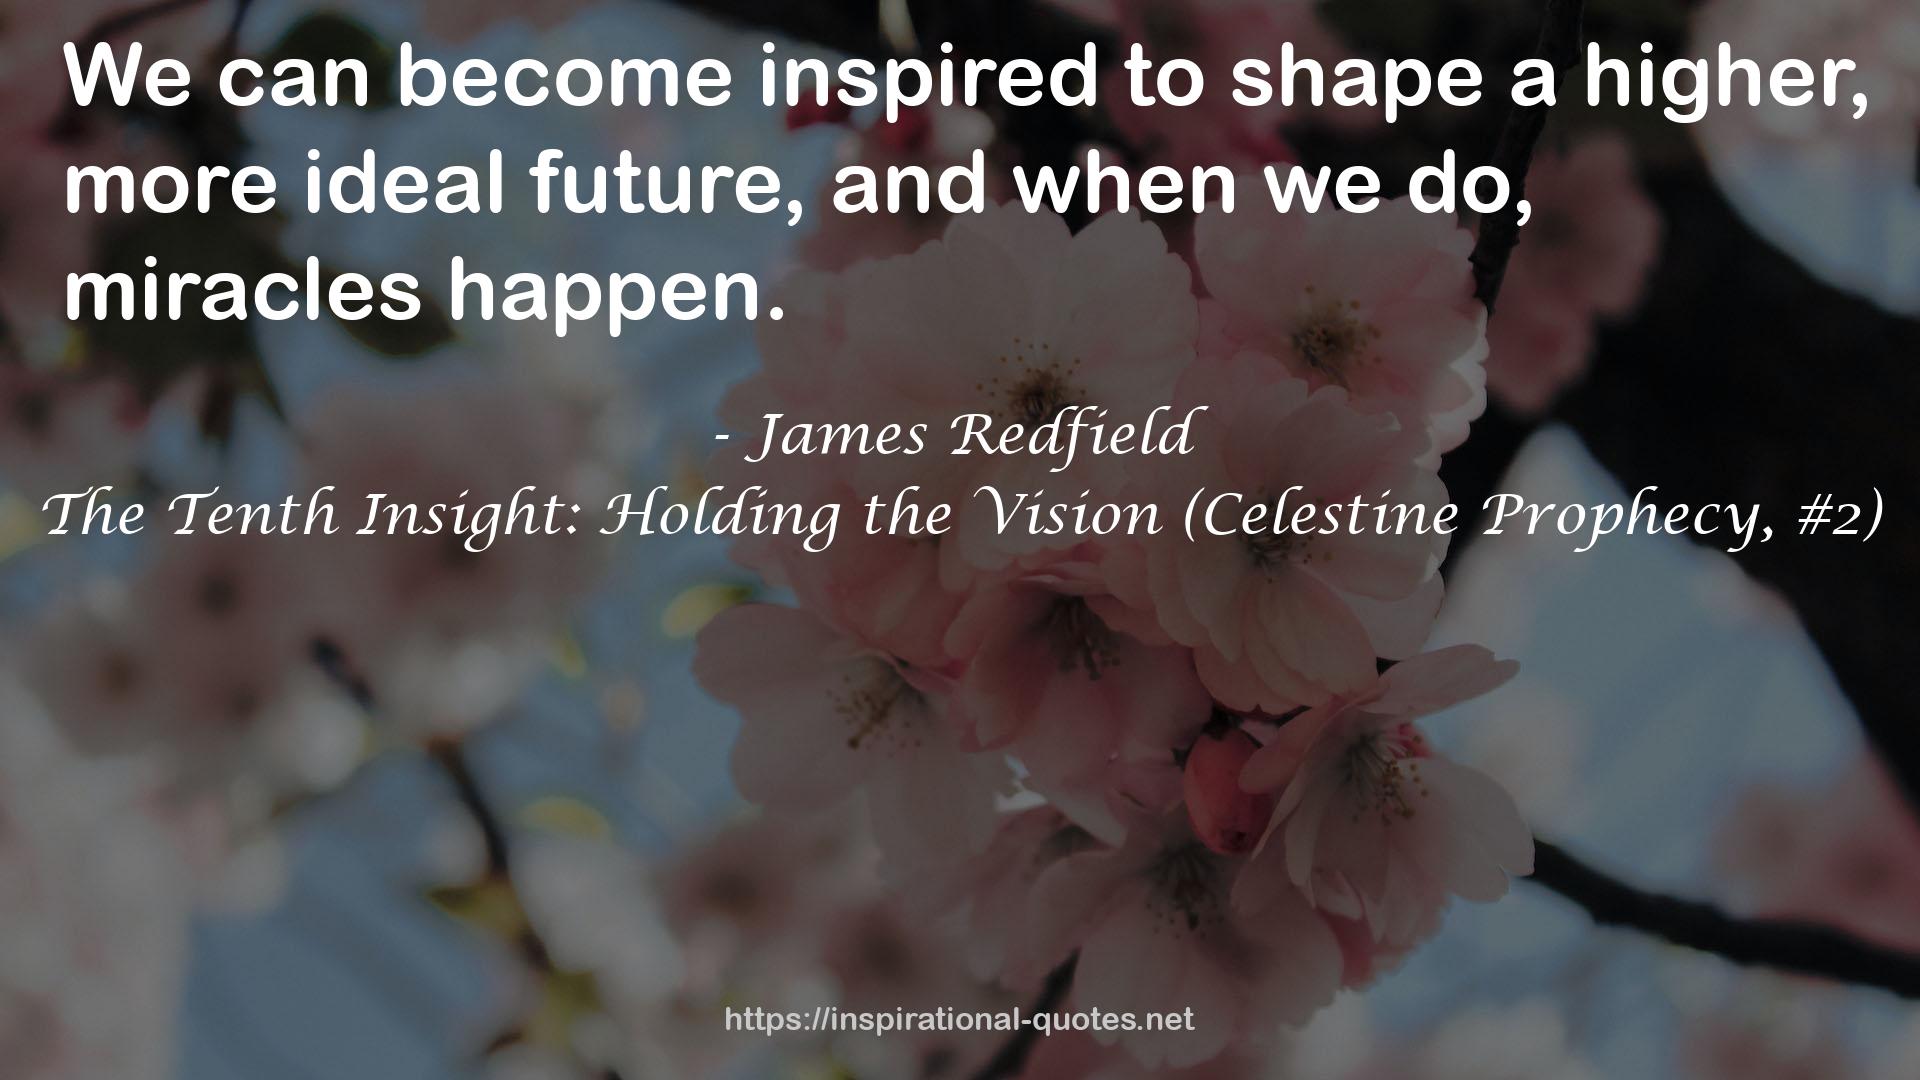 The Tenth Insight: Holding the Vision (Celestine Prophecy, #2) QUOTES